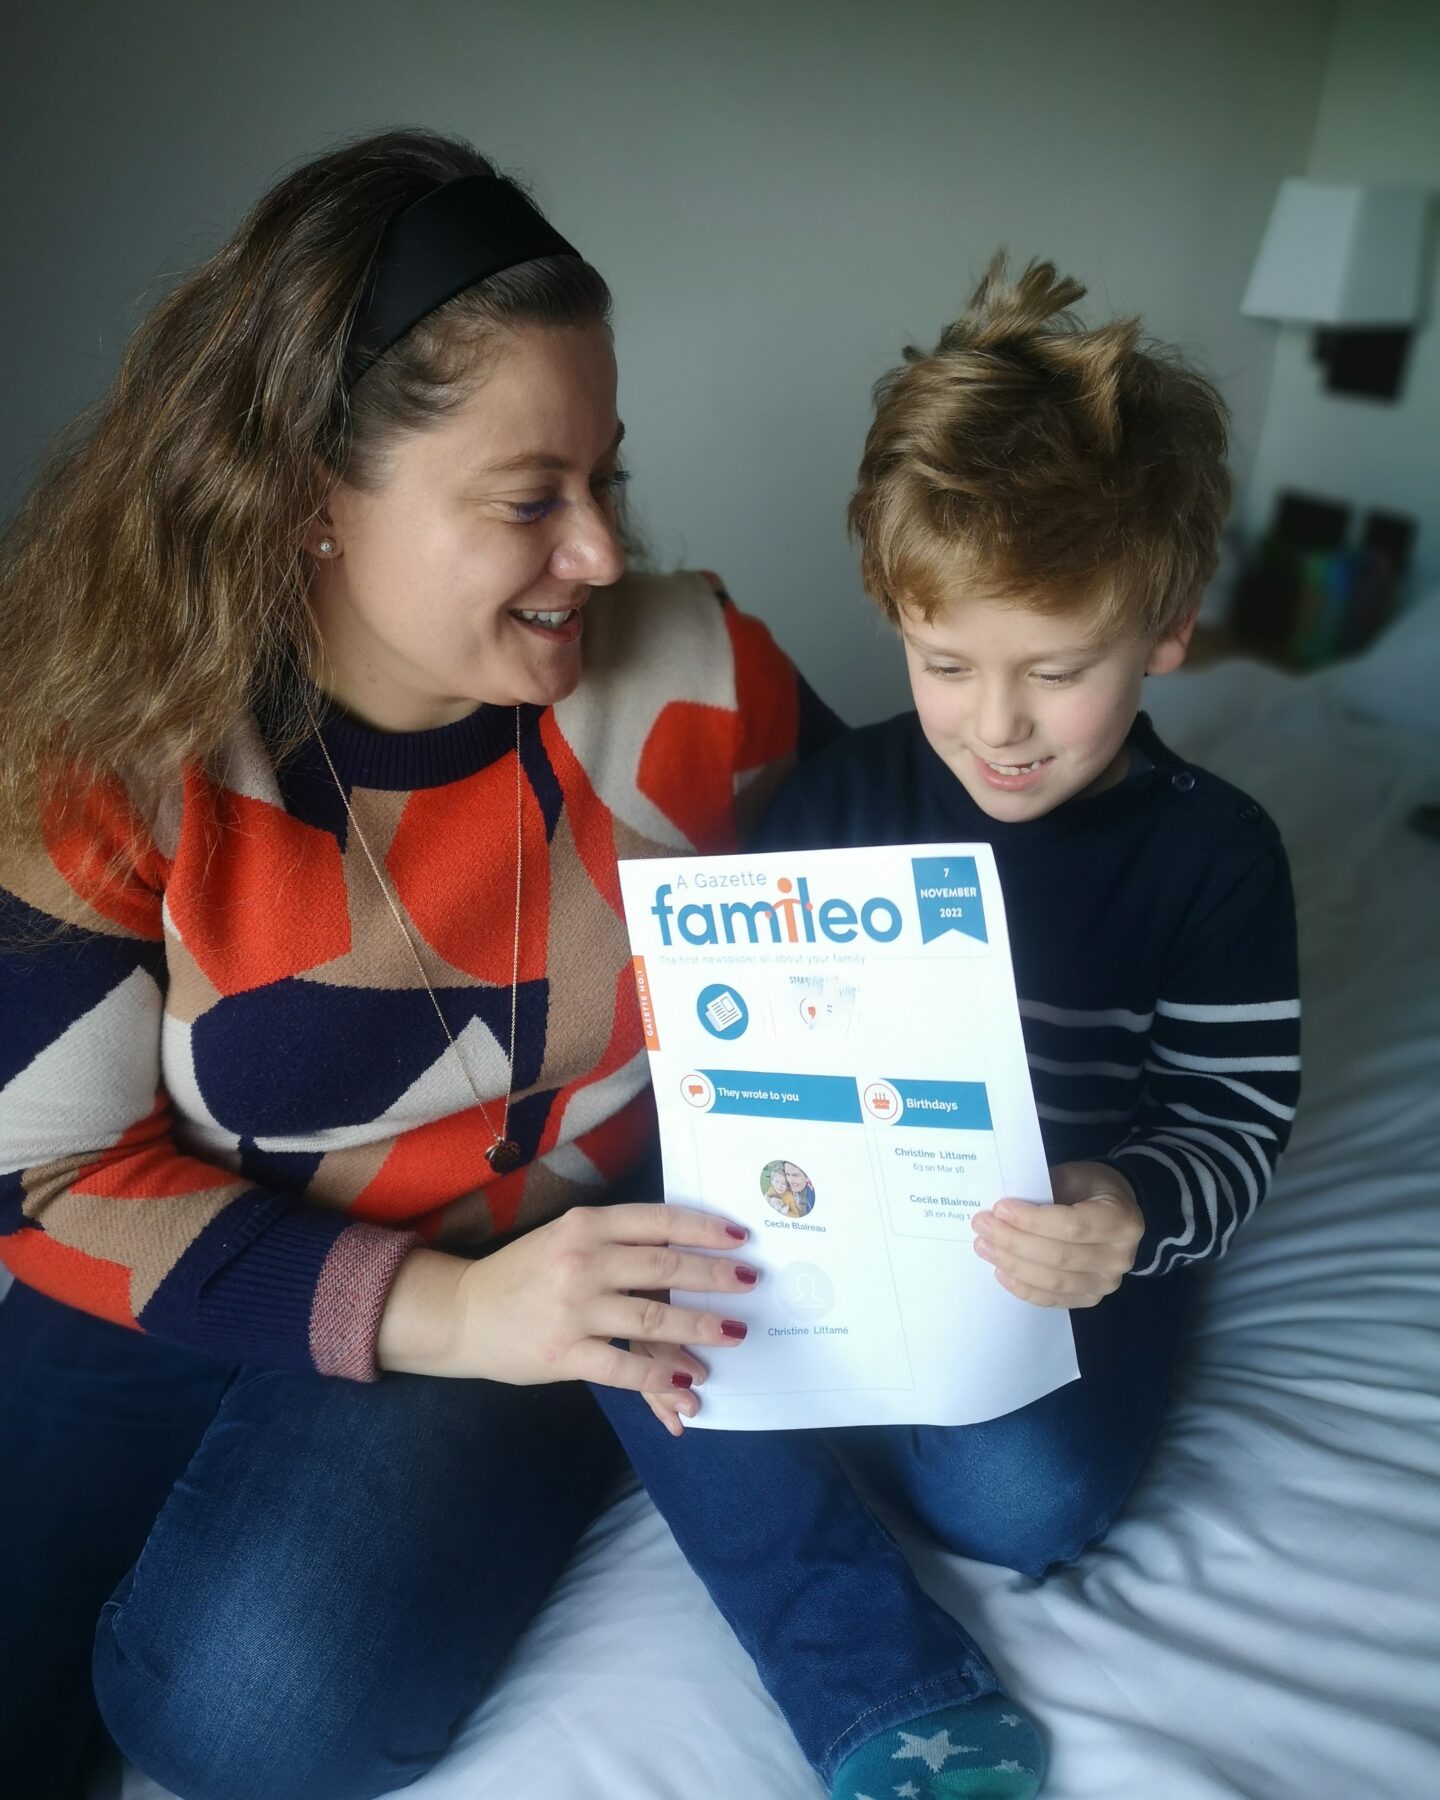 Famileo Subscription, Famileo Newspaper, Family Newspaper, Share News, Photo App, Family App, the Frenchie Mummy, Mother's Day Present, Mother's Day Giveaway, Win, Competition, Family News, Expat Life, App Review